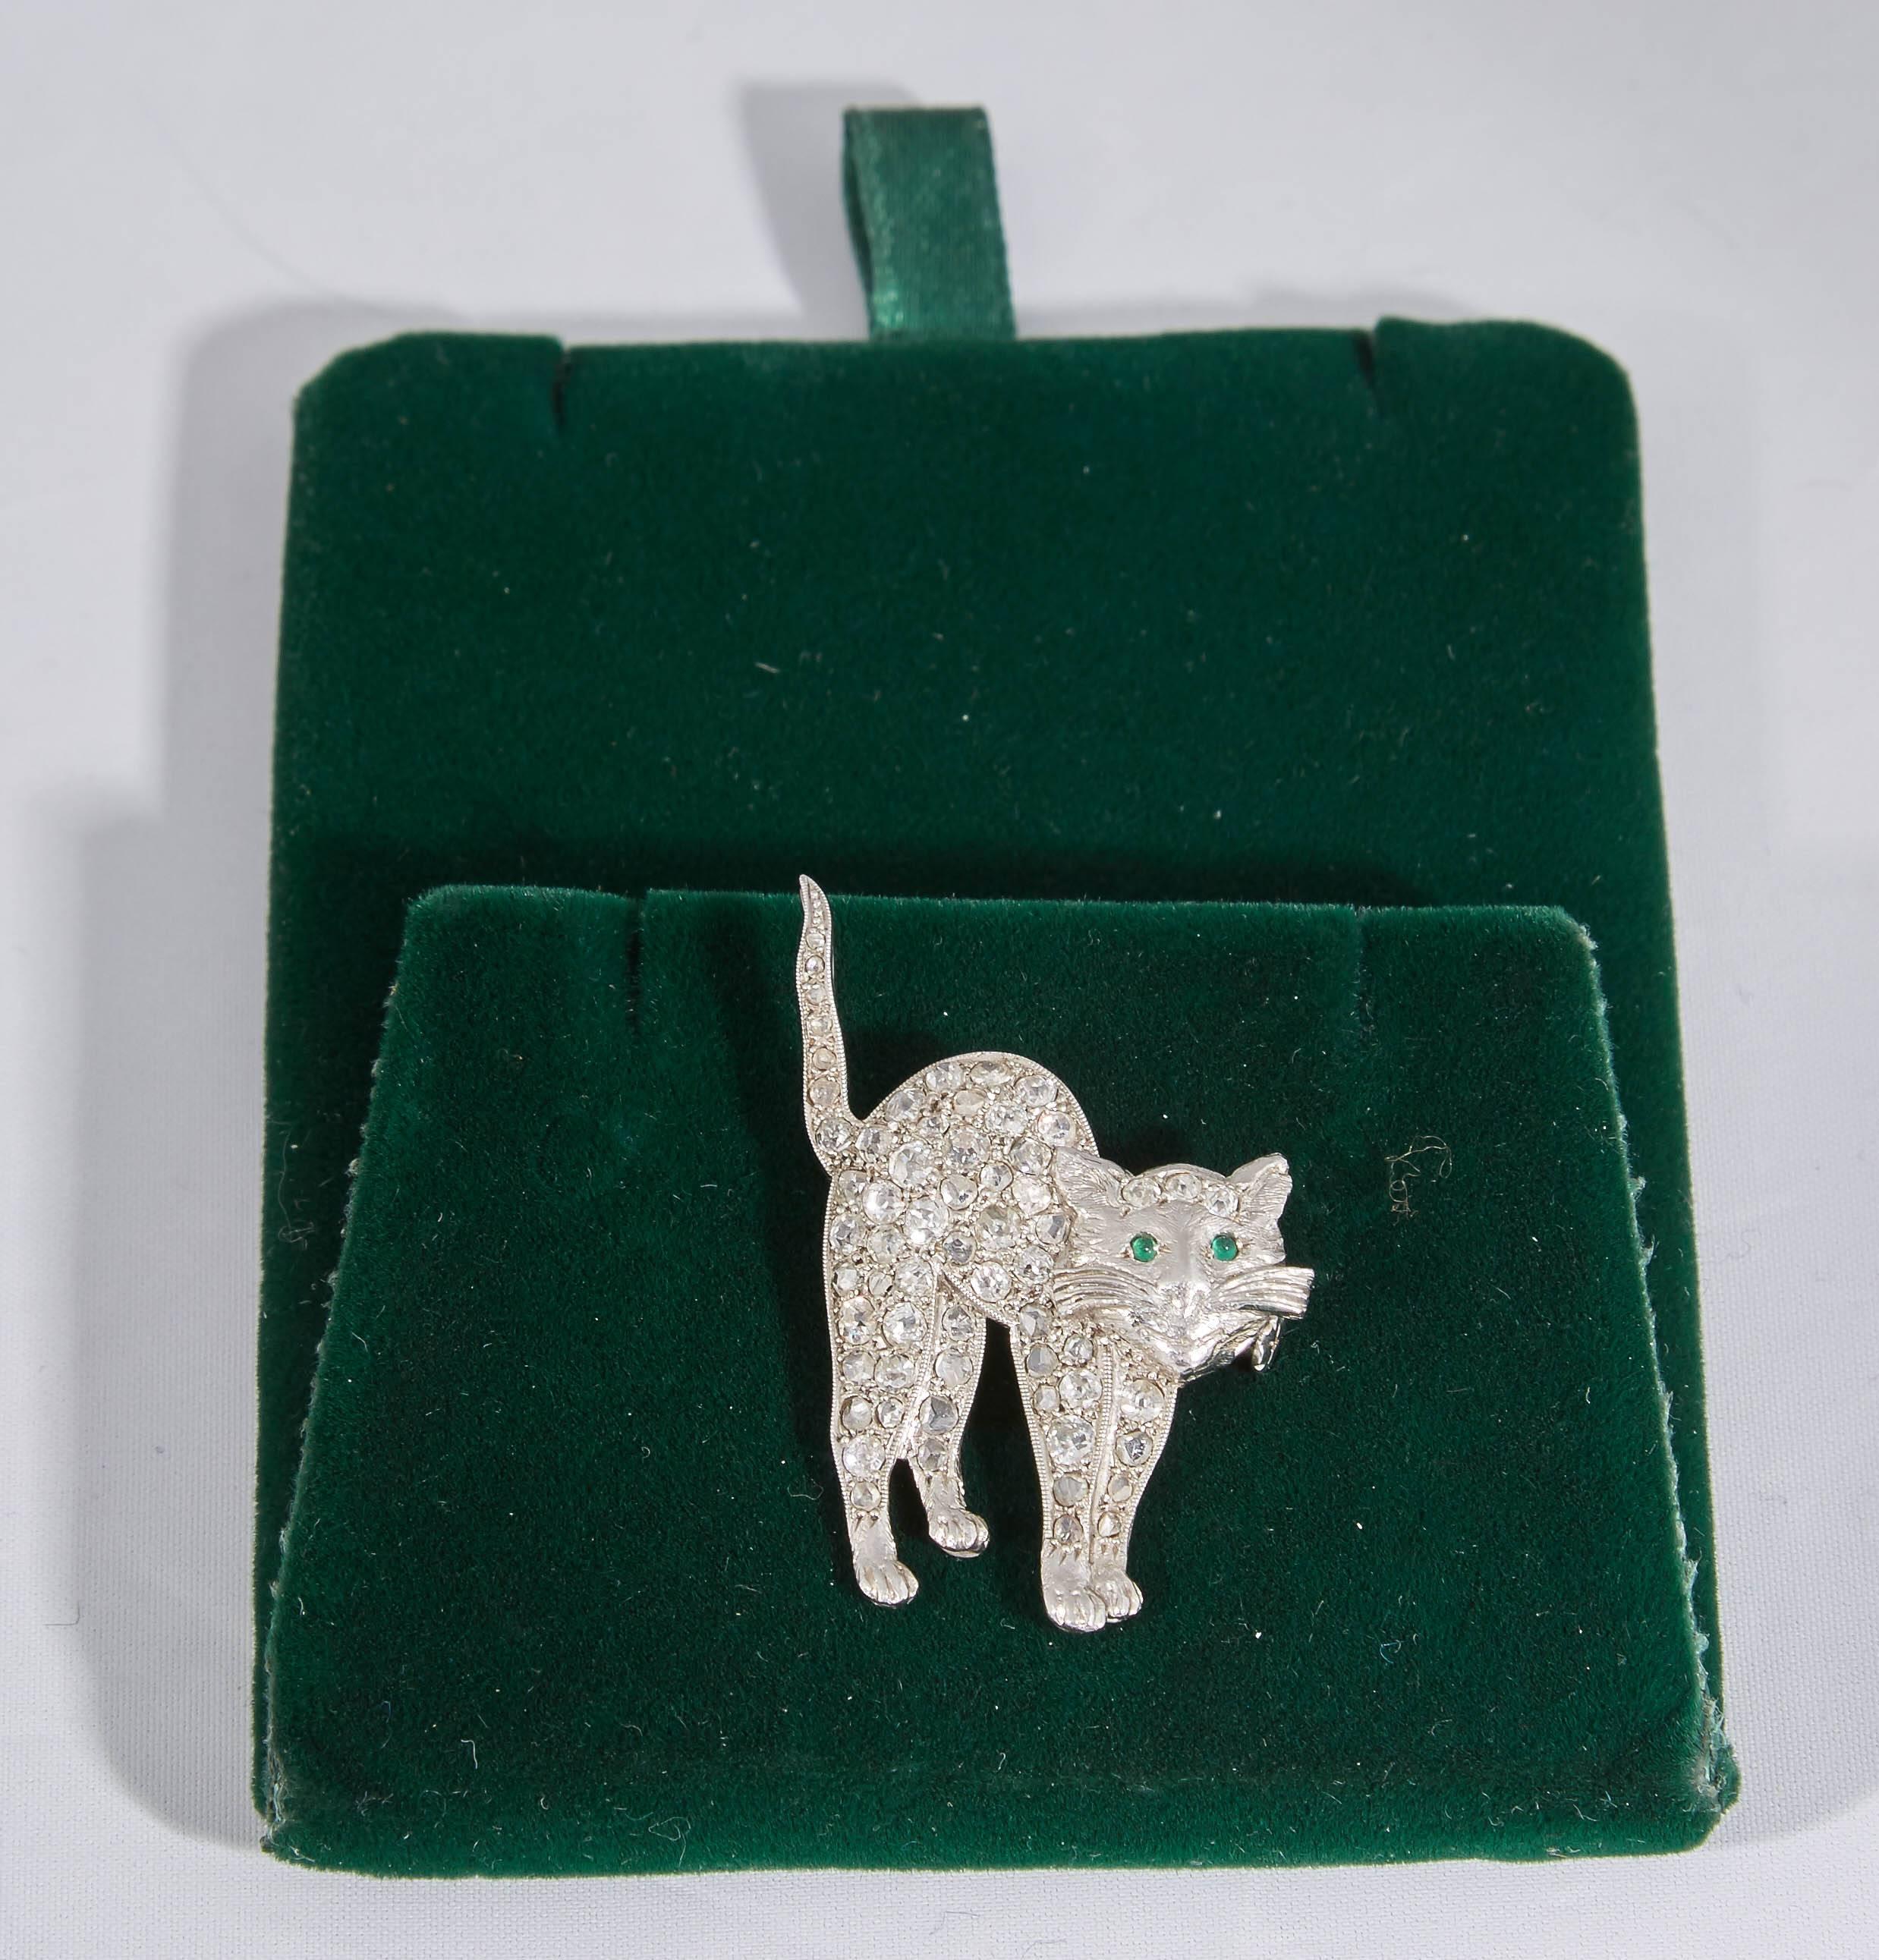 One Platinum And Diamond Antique Cut Diamond Figural Kitty Cat Brooch Beautifully Bead Set Diamonds Weighing Approximately 2 Carats Embellished with 2 Cabochon Emerald For Eyes. Beautiful Platinum Workmanship Exhibited by Handmade Craftmanship For